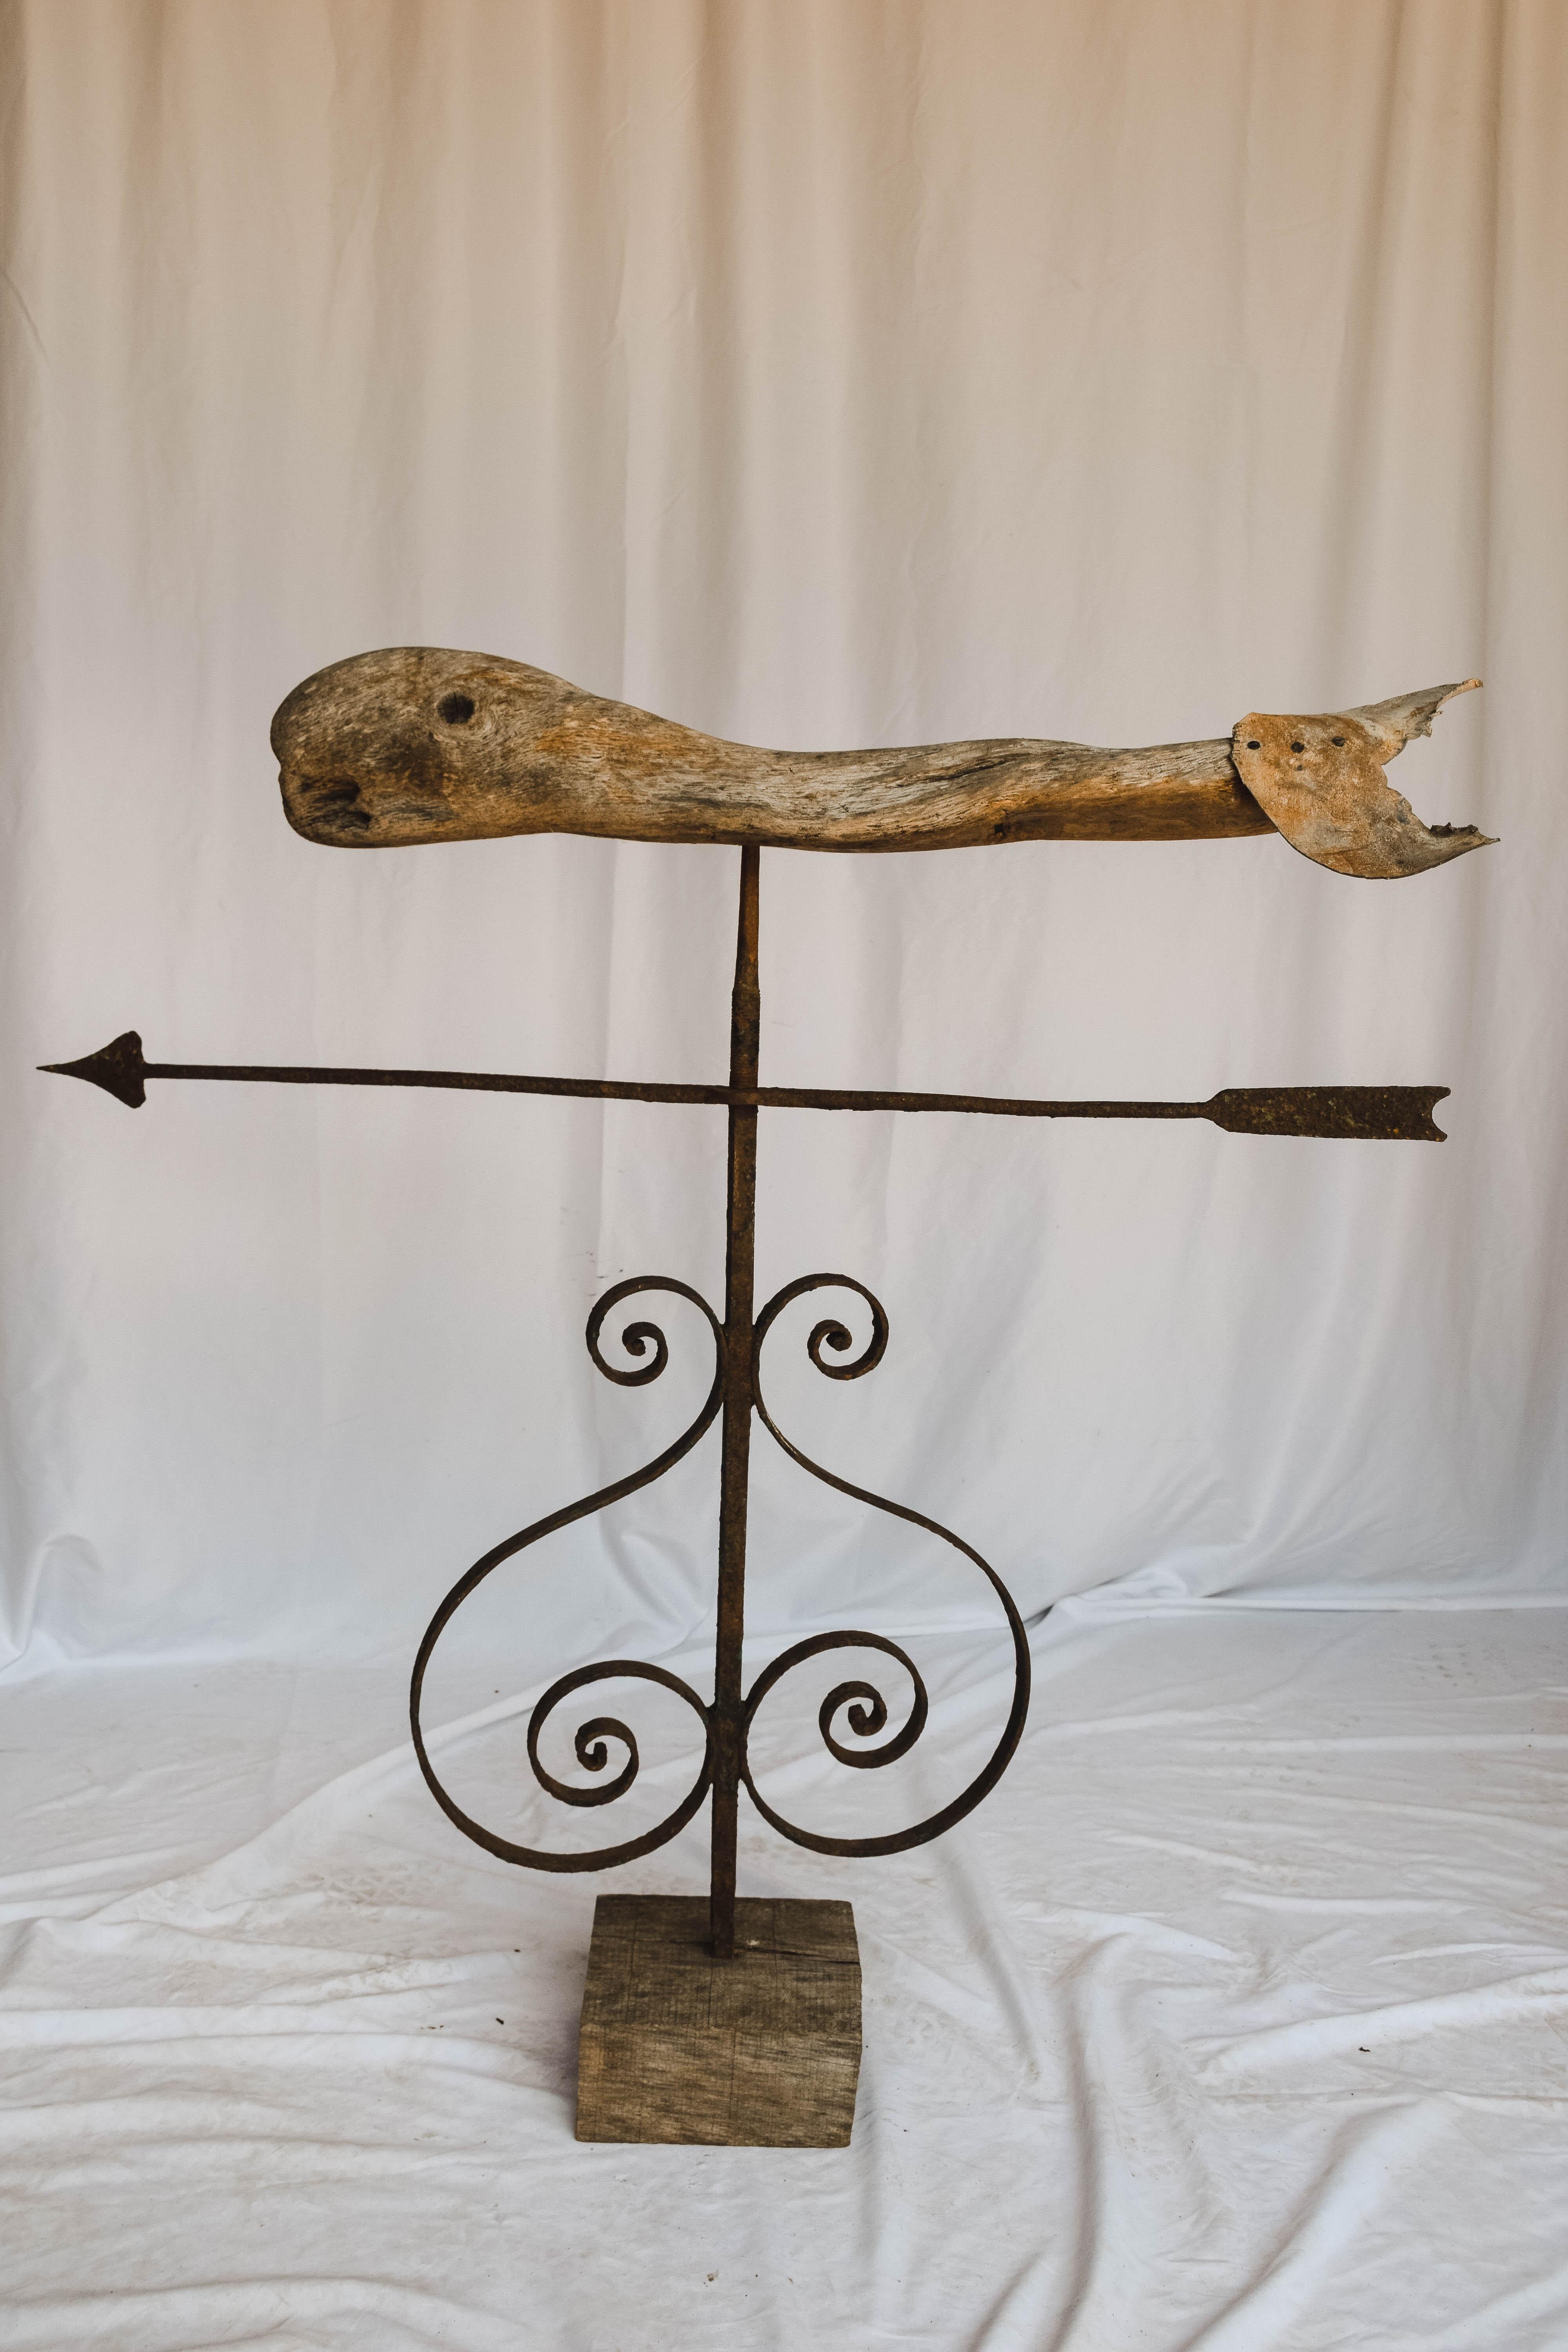 This wonderful vintage whale weather vane has a fantastic aged patina. The rustic wooden whale sits on a custom wood base attached by a metal rod with a Directional arrow and scroll work. Truly a fabulous decorative piece. We found this weathervane